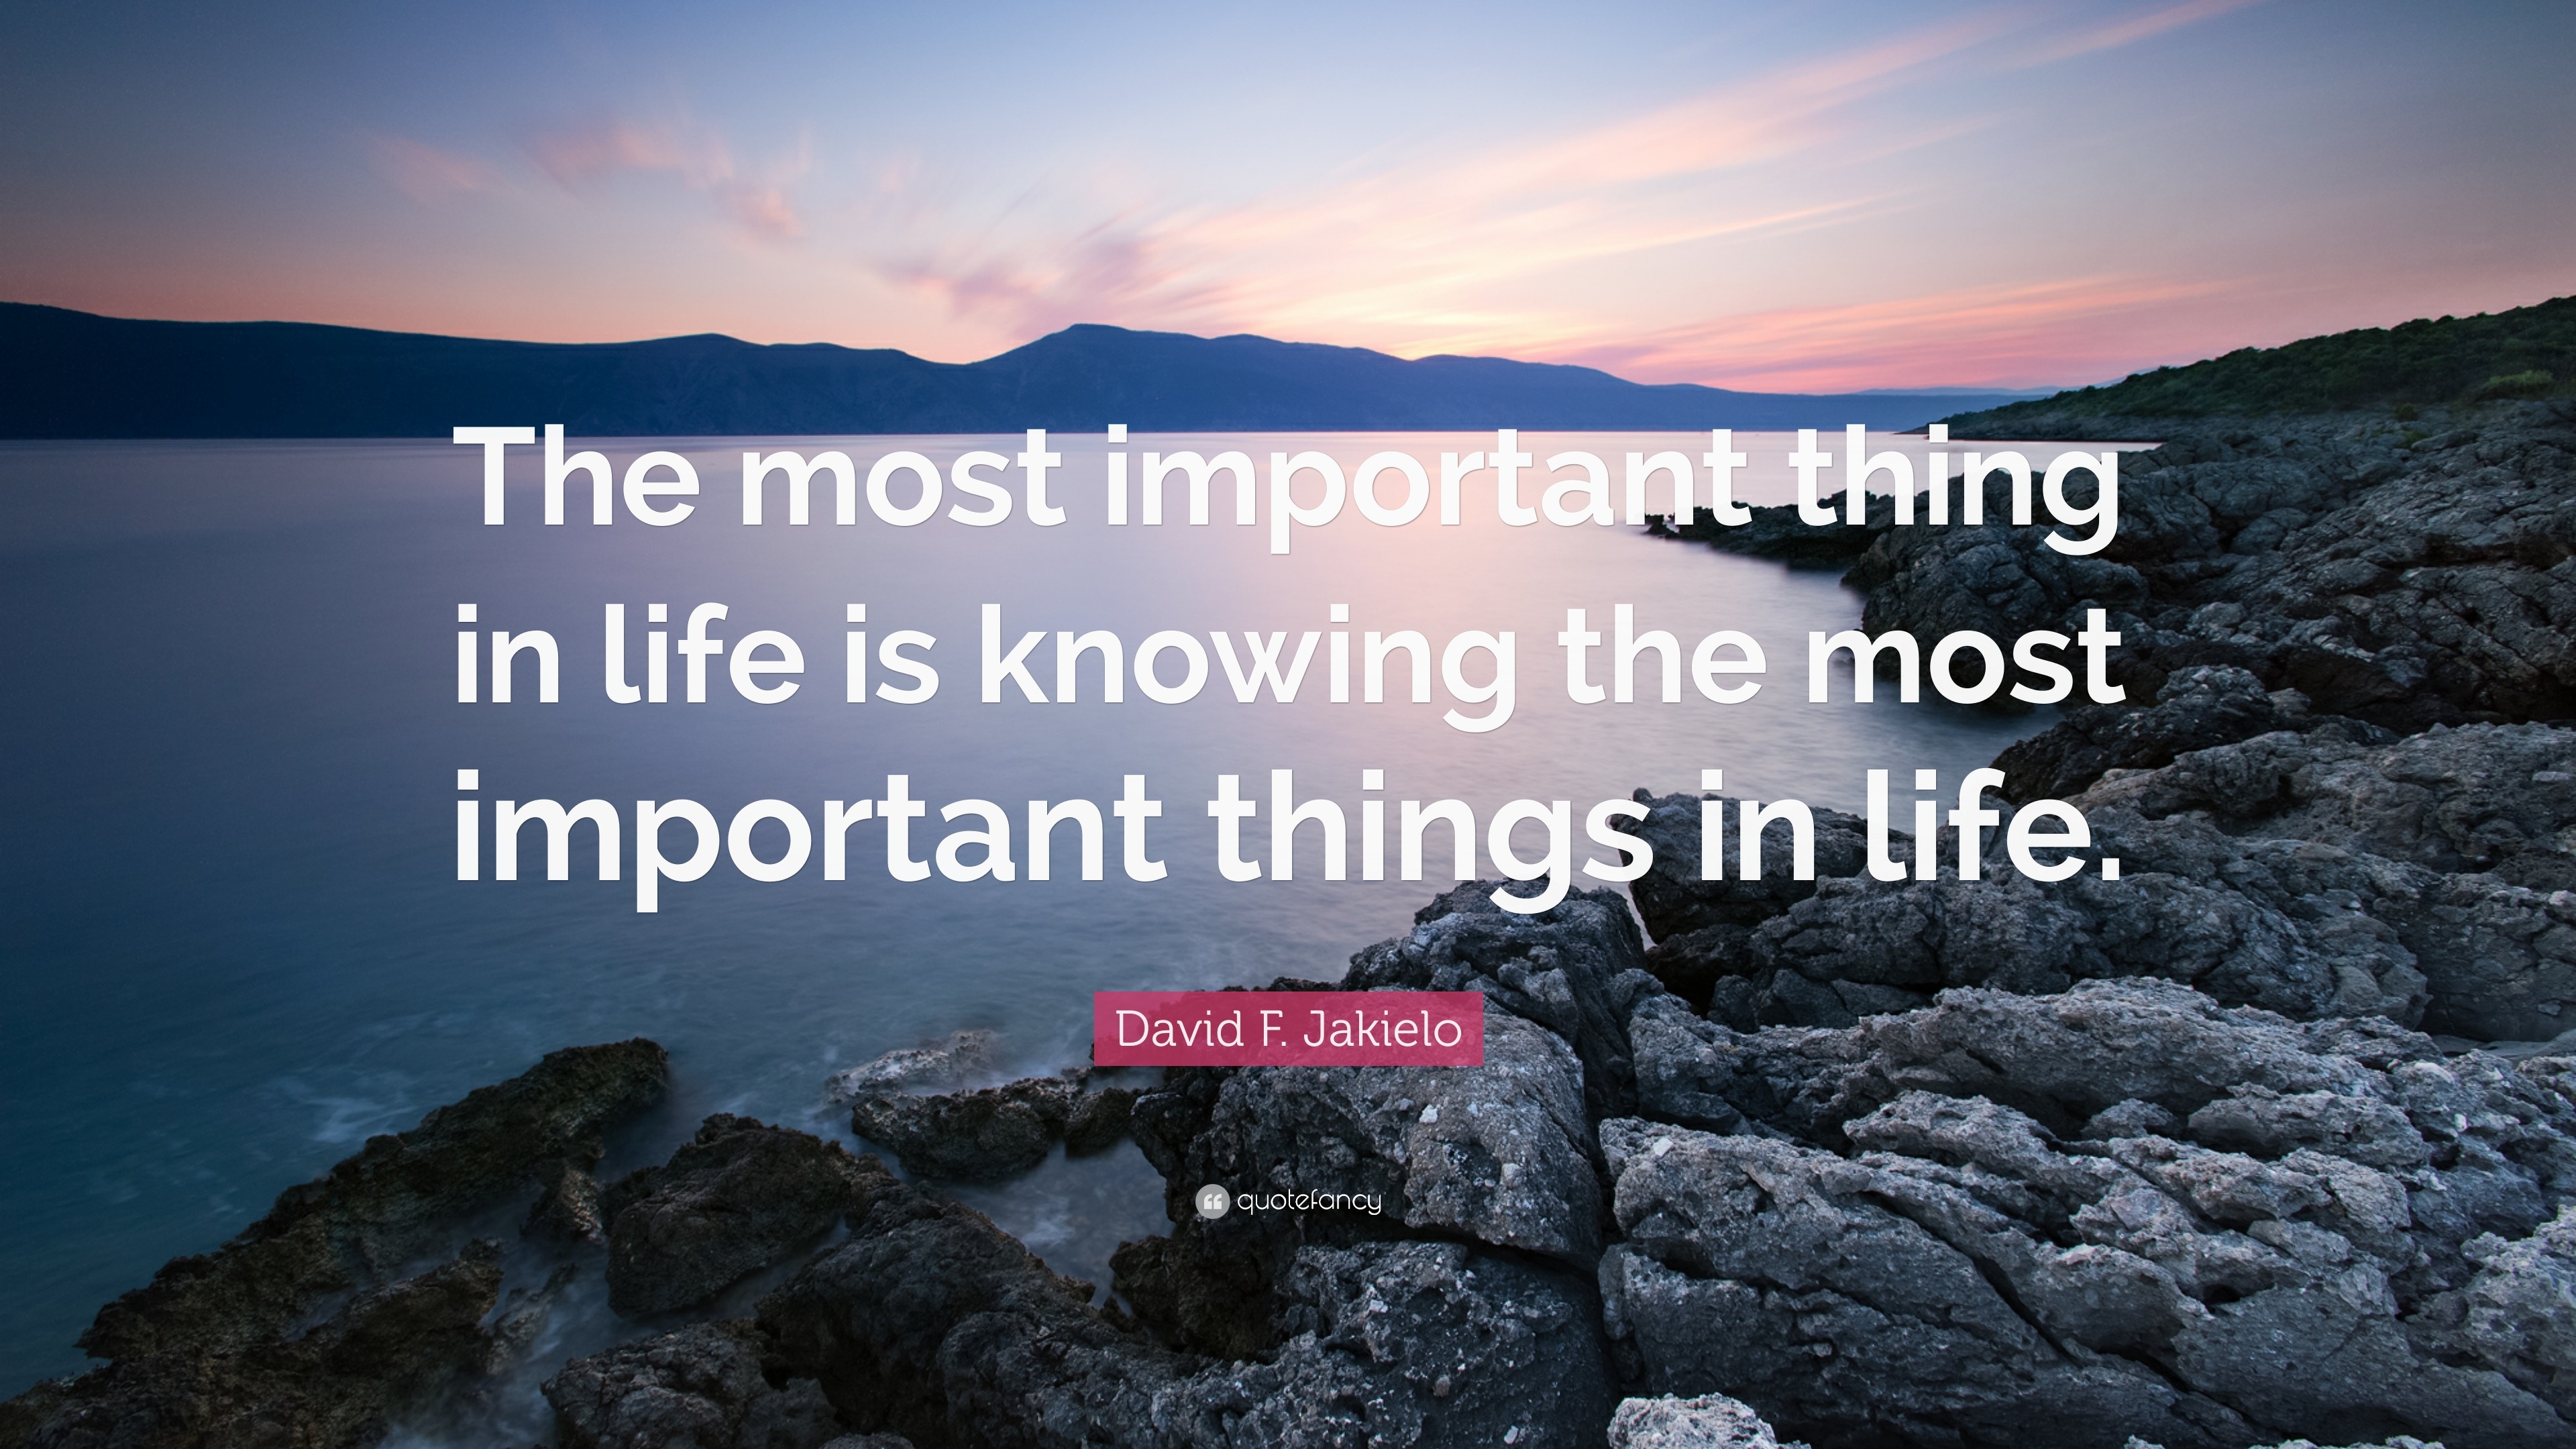 David F. Jakielo Quote: “The most important thing in life is knowing